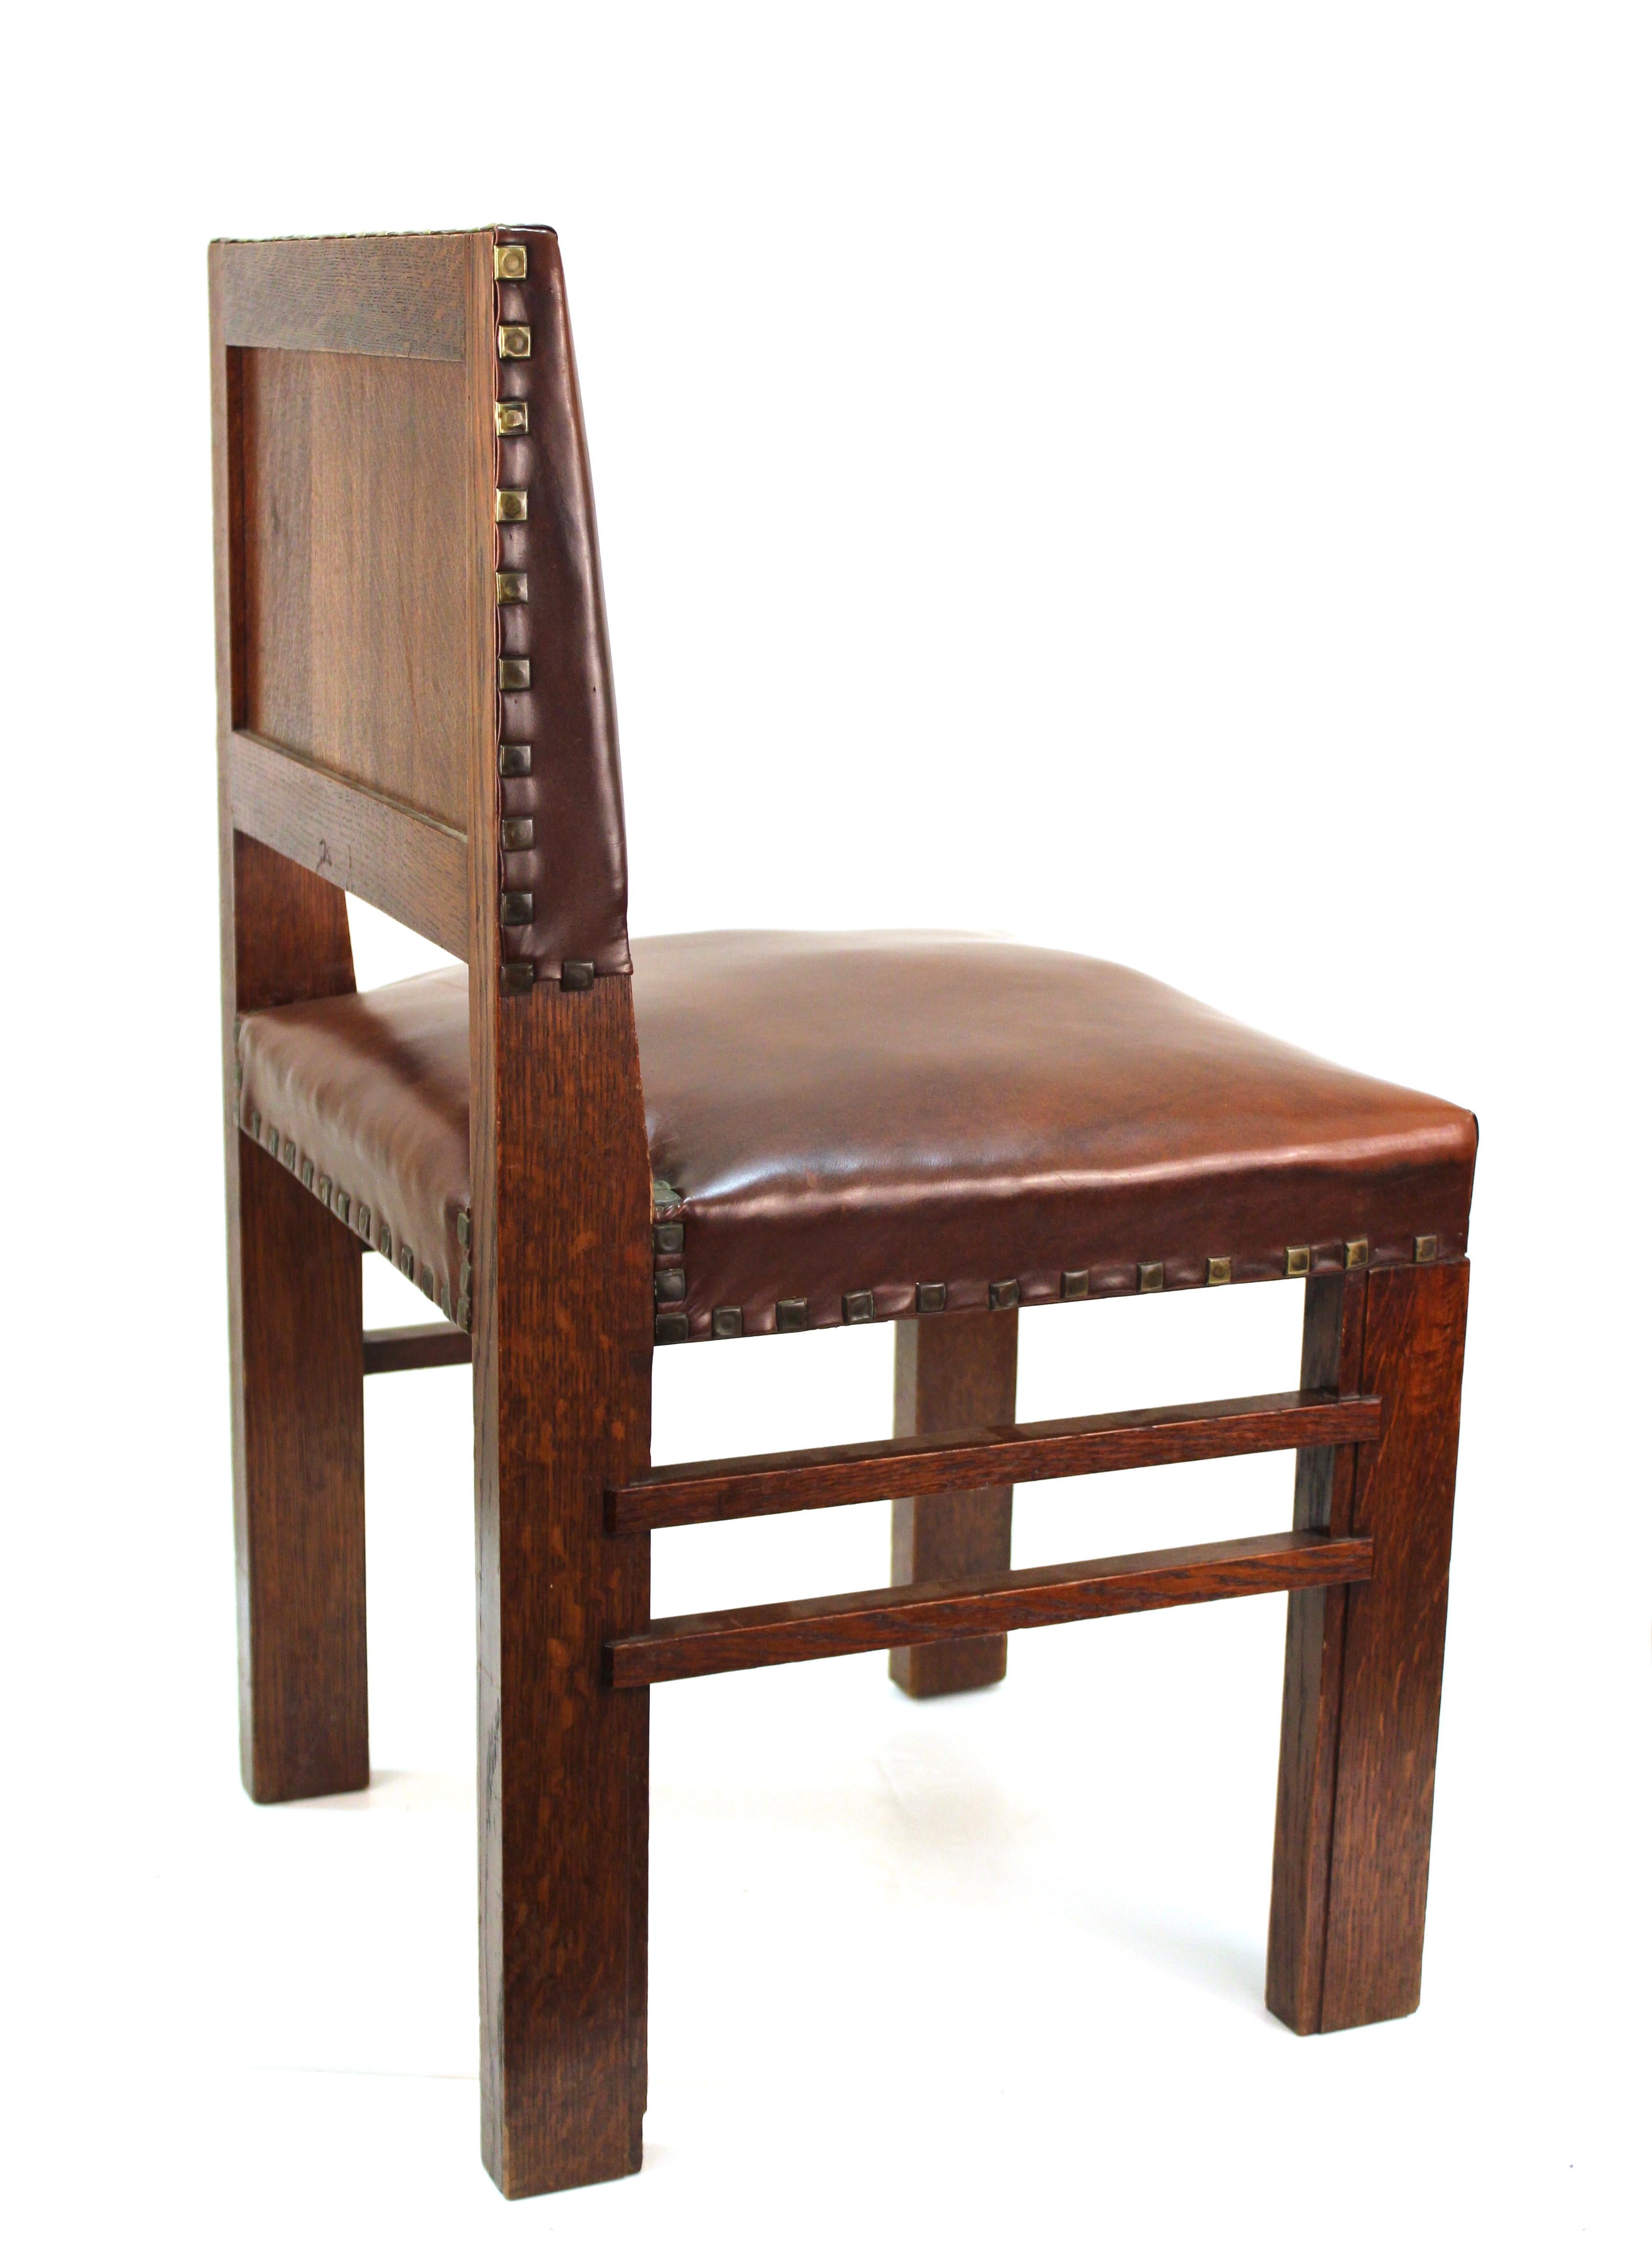 American Arts & Crafts Oak Chairs with Cognac Colored Leather Seats For Sale 1